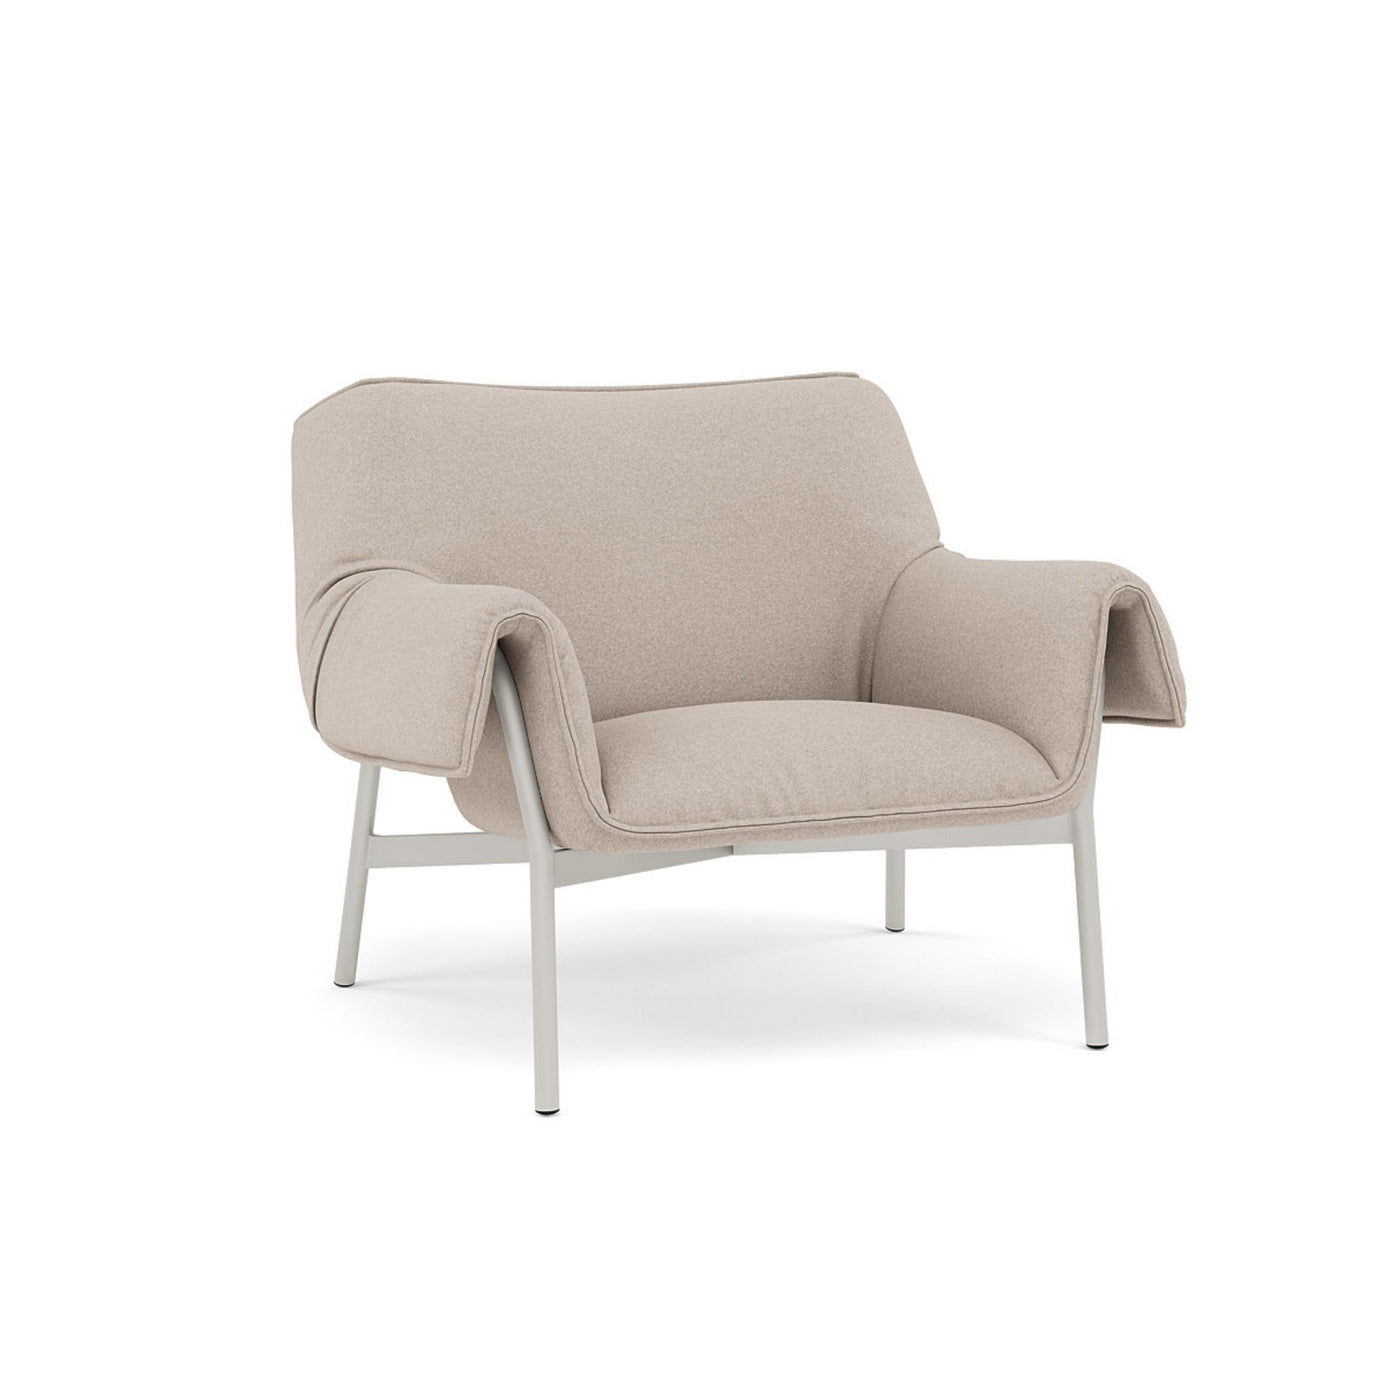 Muuto Wrap Lounge Chair. Made to order from someday designs. #colour_divina-md-213-natural